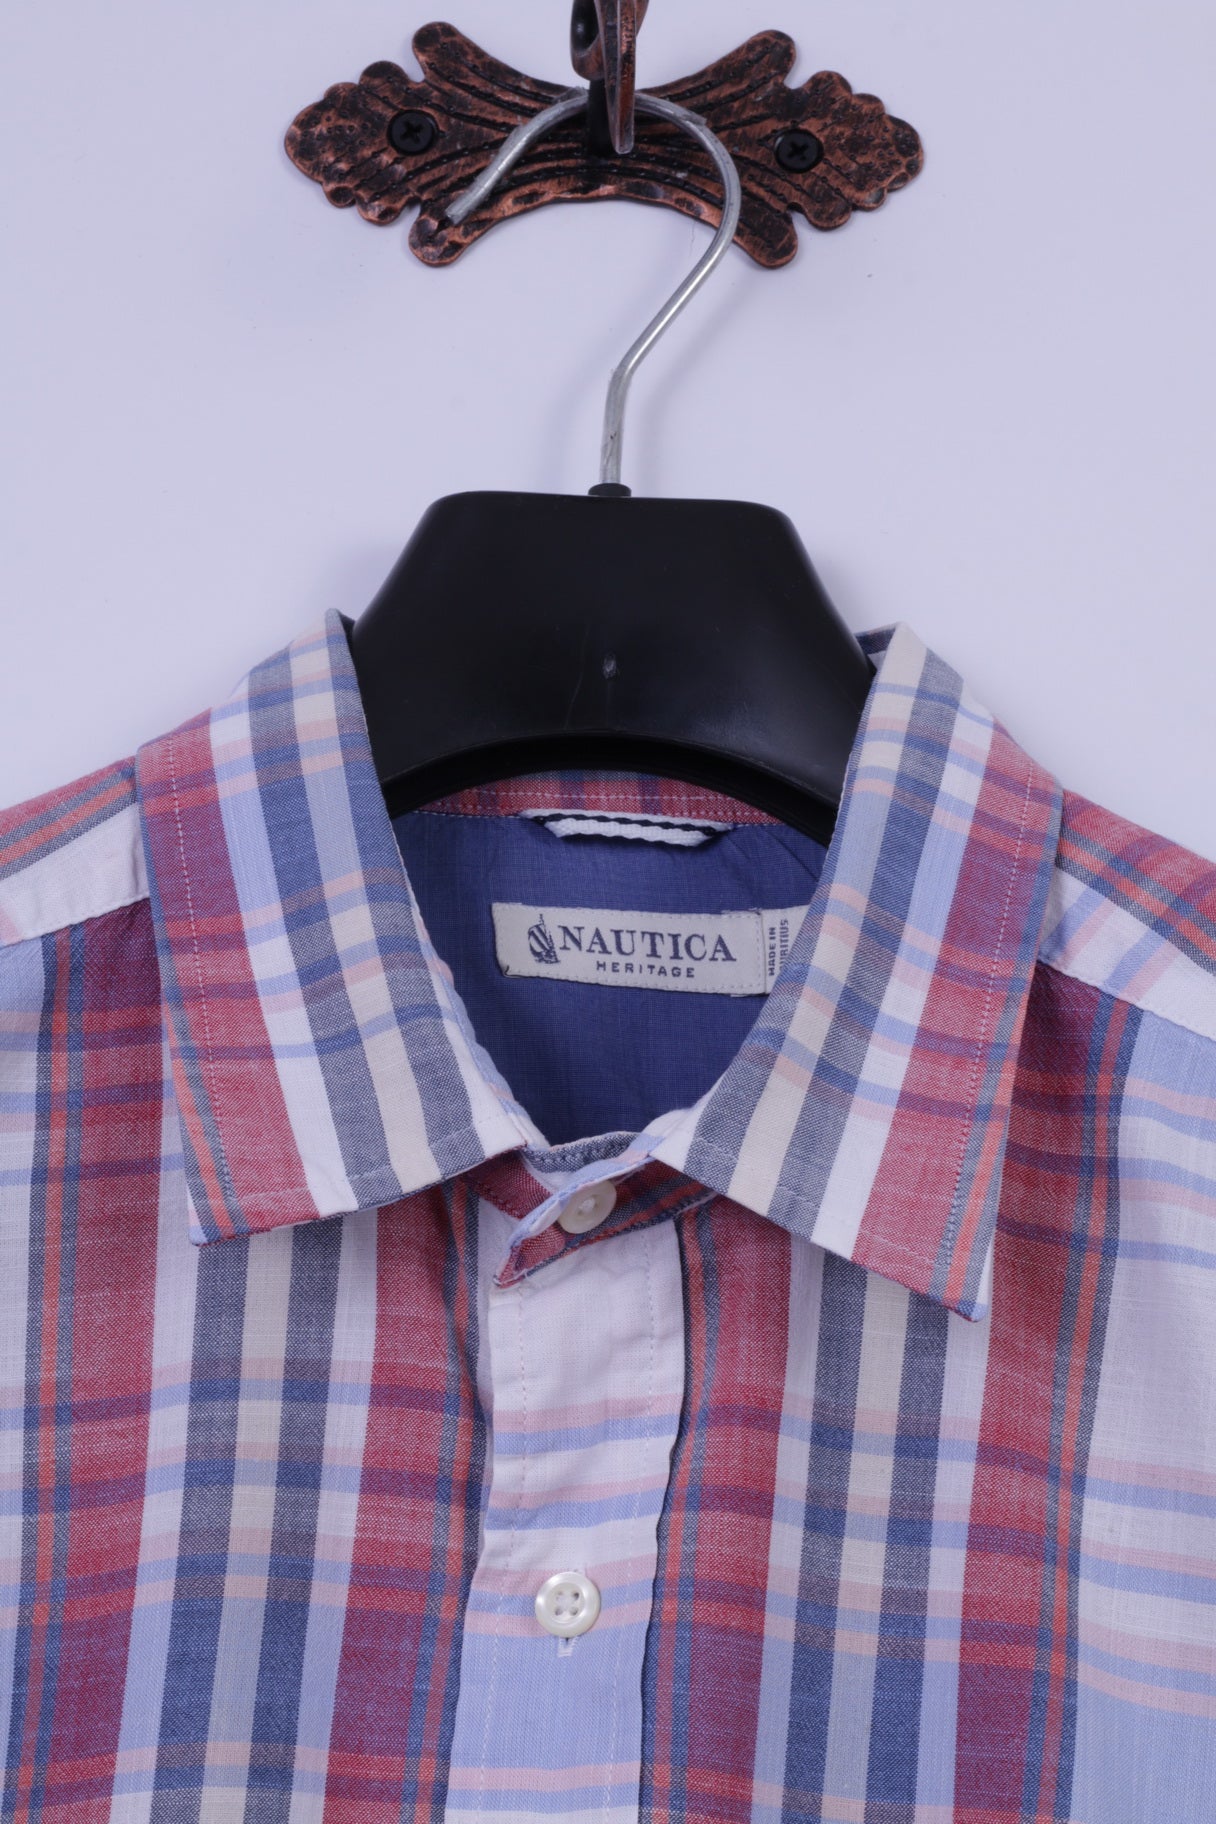 Nautica Mens L Casual Shirt Blue Check Heritage Fit 100% Cotton Long Sleeve